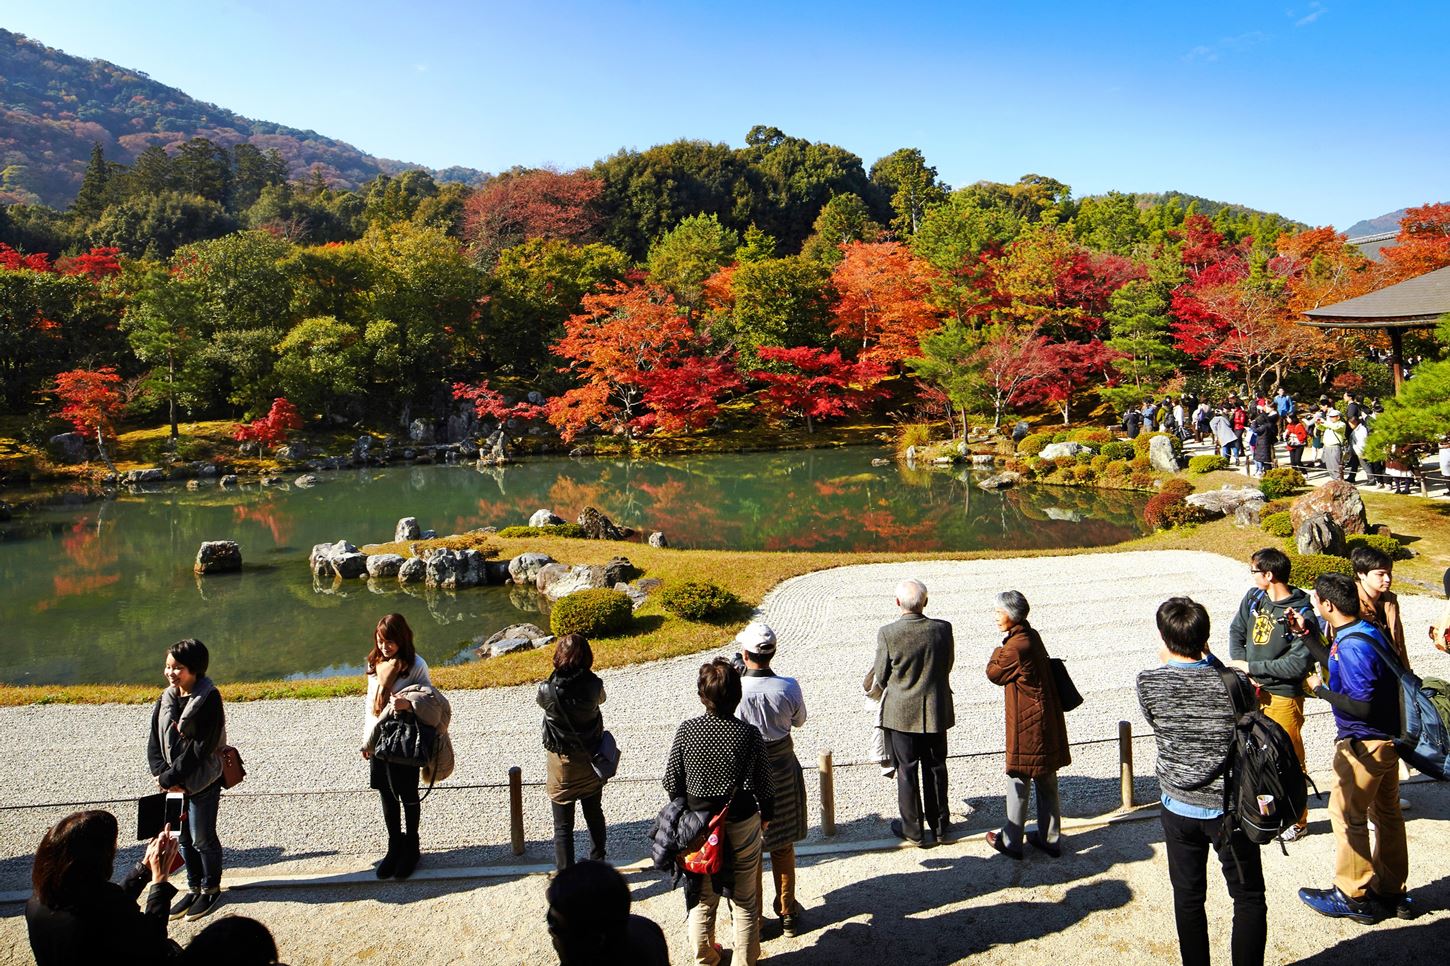 Sightseeing scenery that simply shows the weather in Kyoto in November5